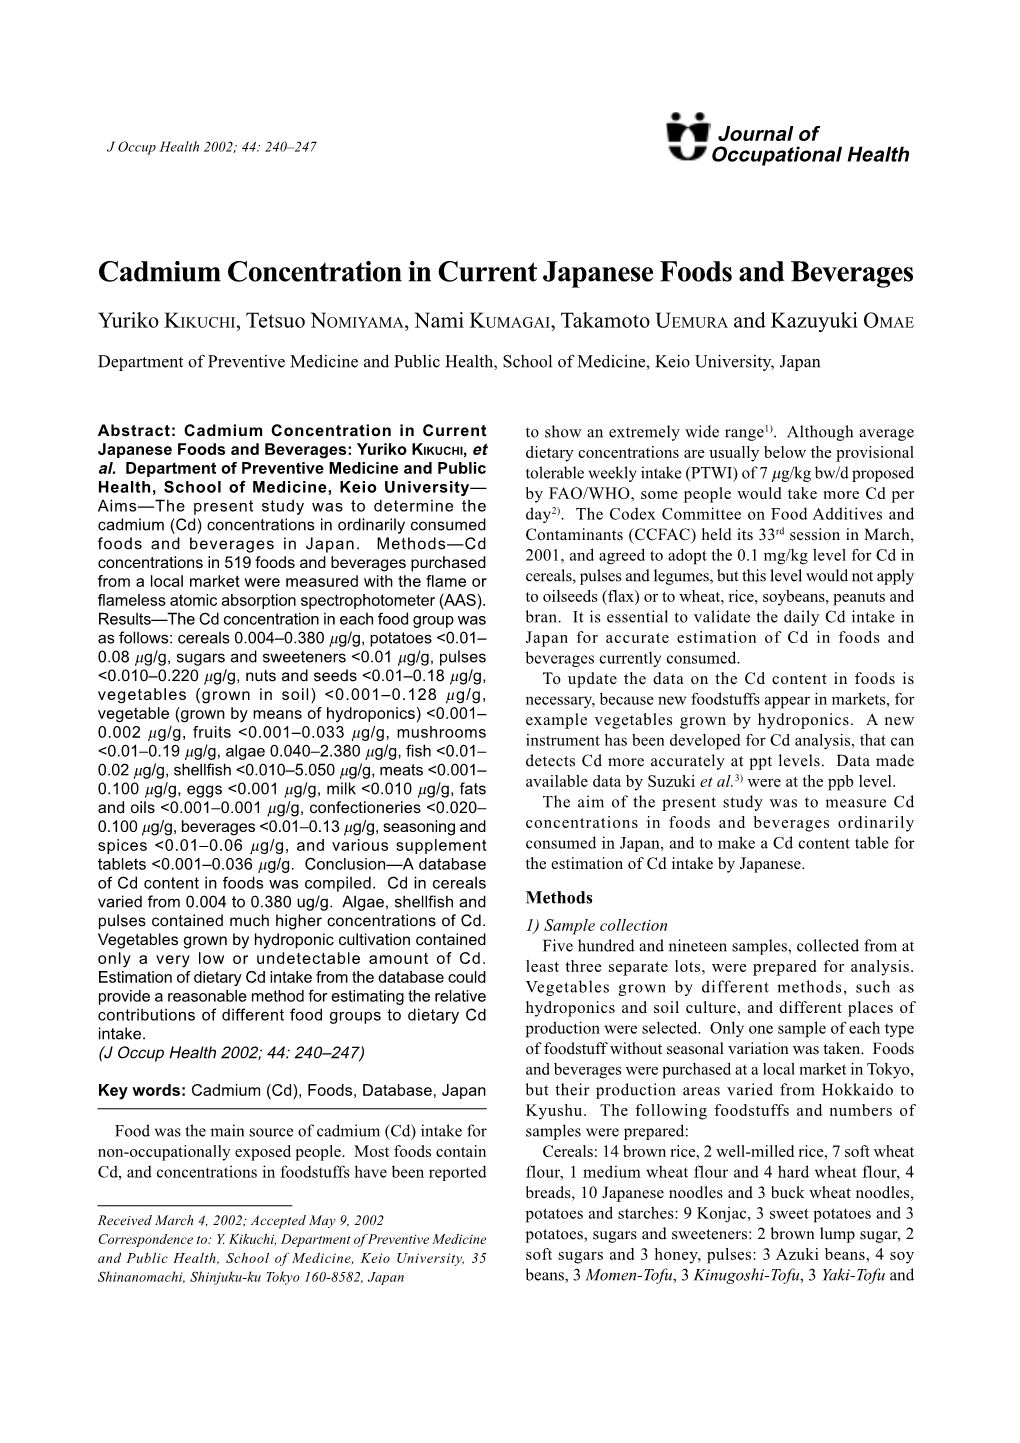 Cadmium Concentration in Current Japanese Foods and Beverages